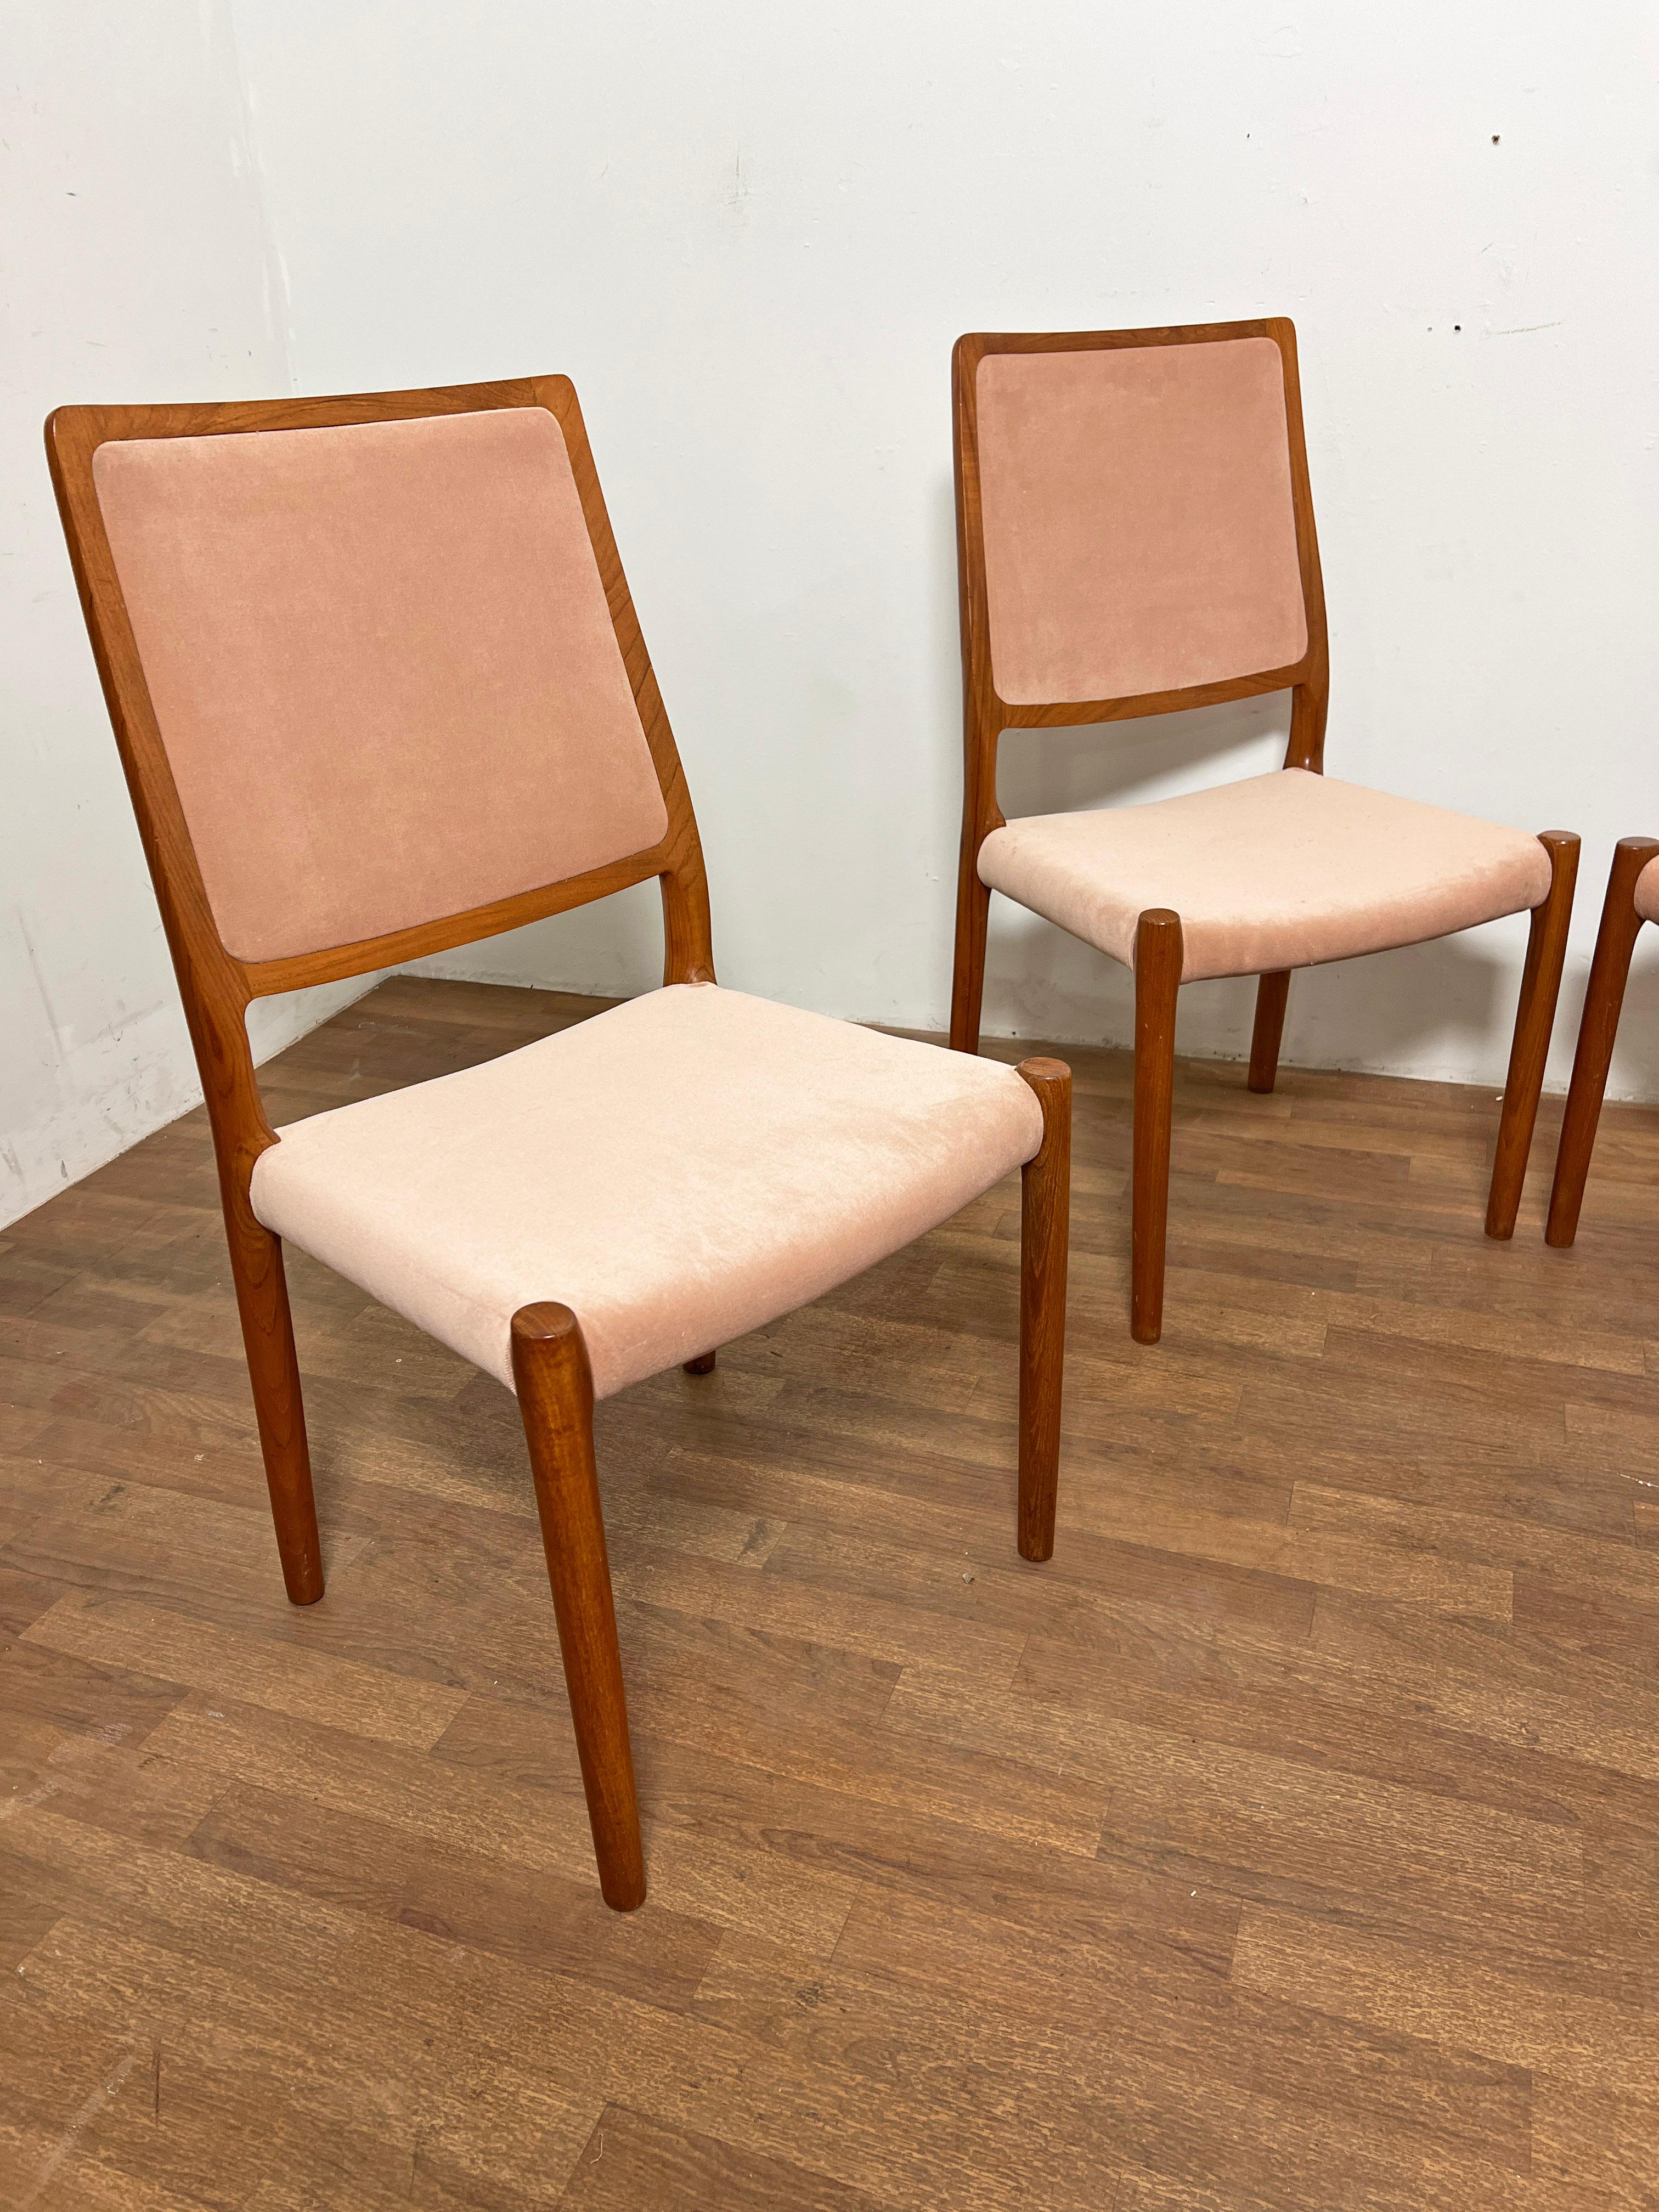 Set of four teak dining chairs, Model #86, designed by Niels Moller for J.L. Moller, Denmark, circa mid 1980s.